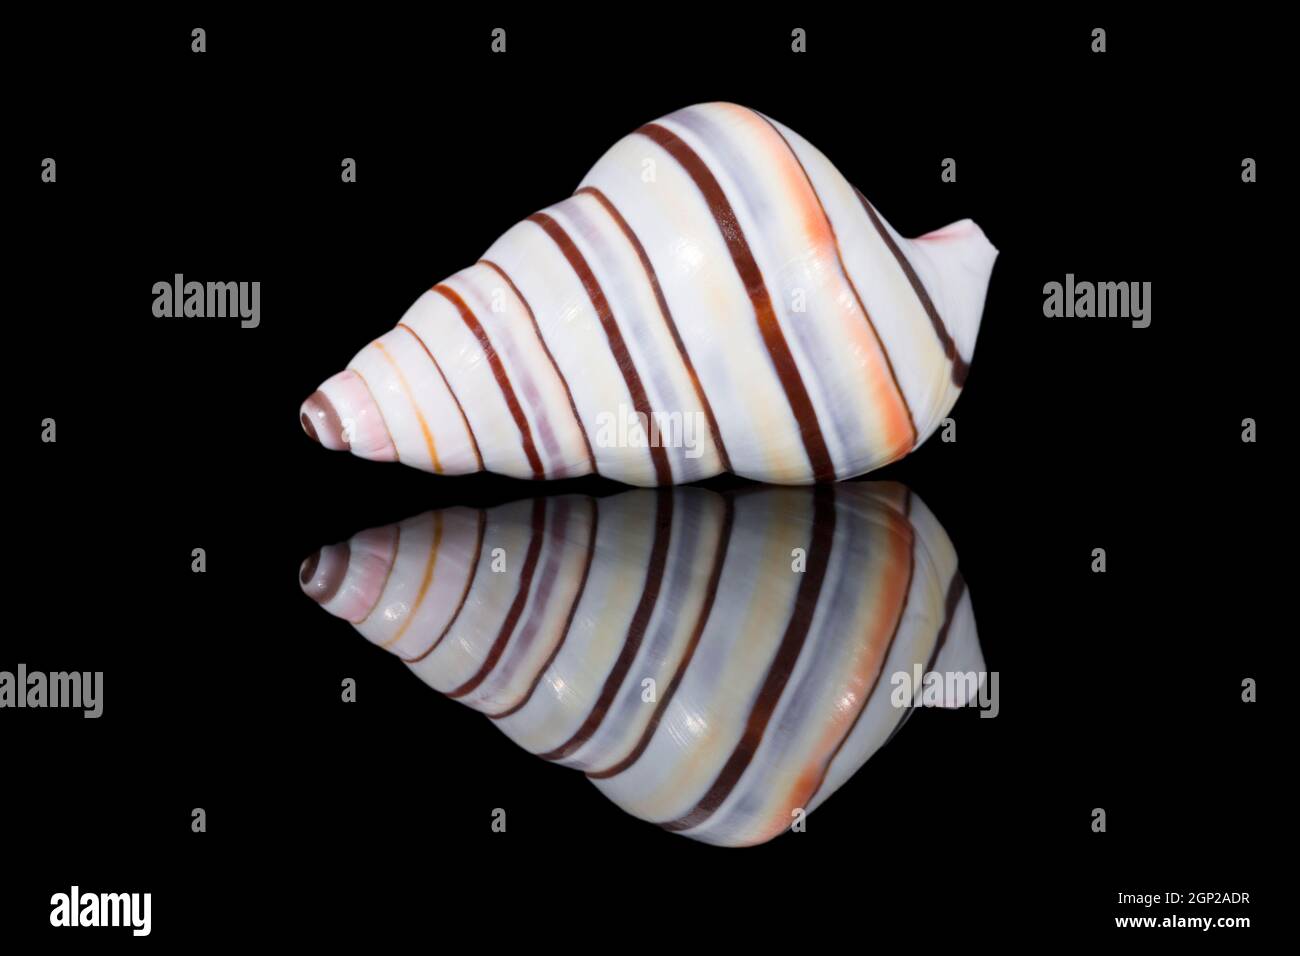 Single striped shell of Liguus virgineus also known as the candy cane snail, tree-living snail native to the Caribbean isolated on black background, m Stock Photo